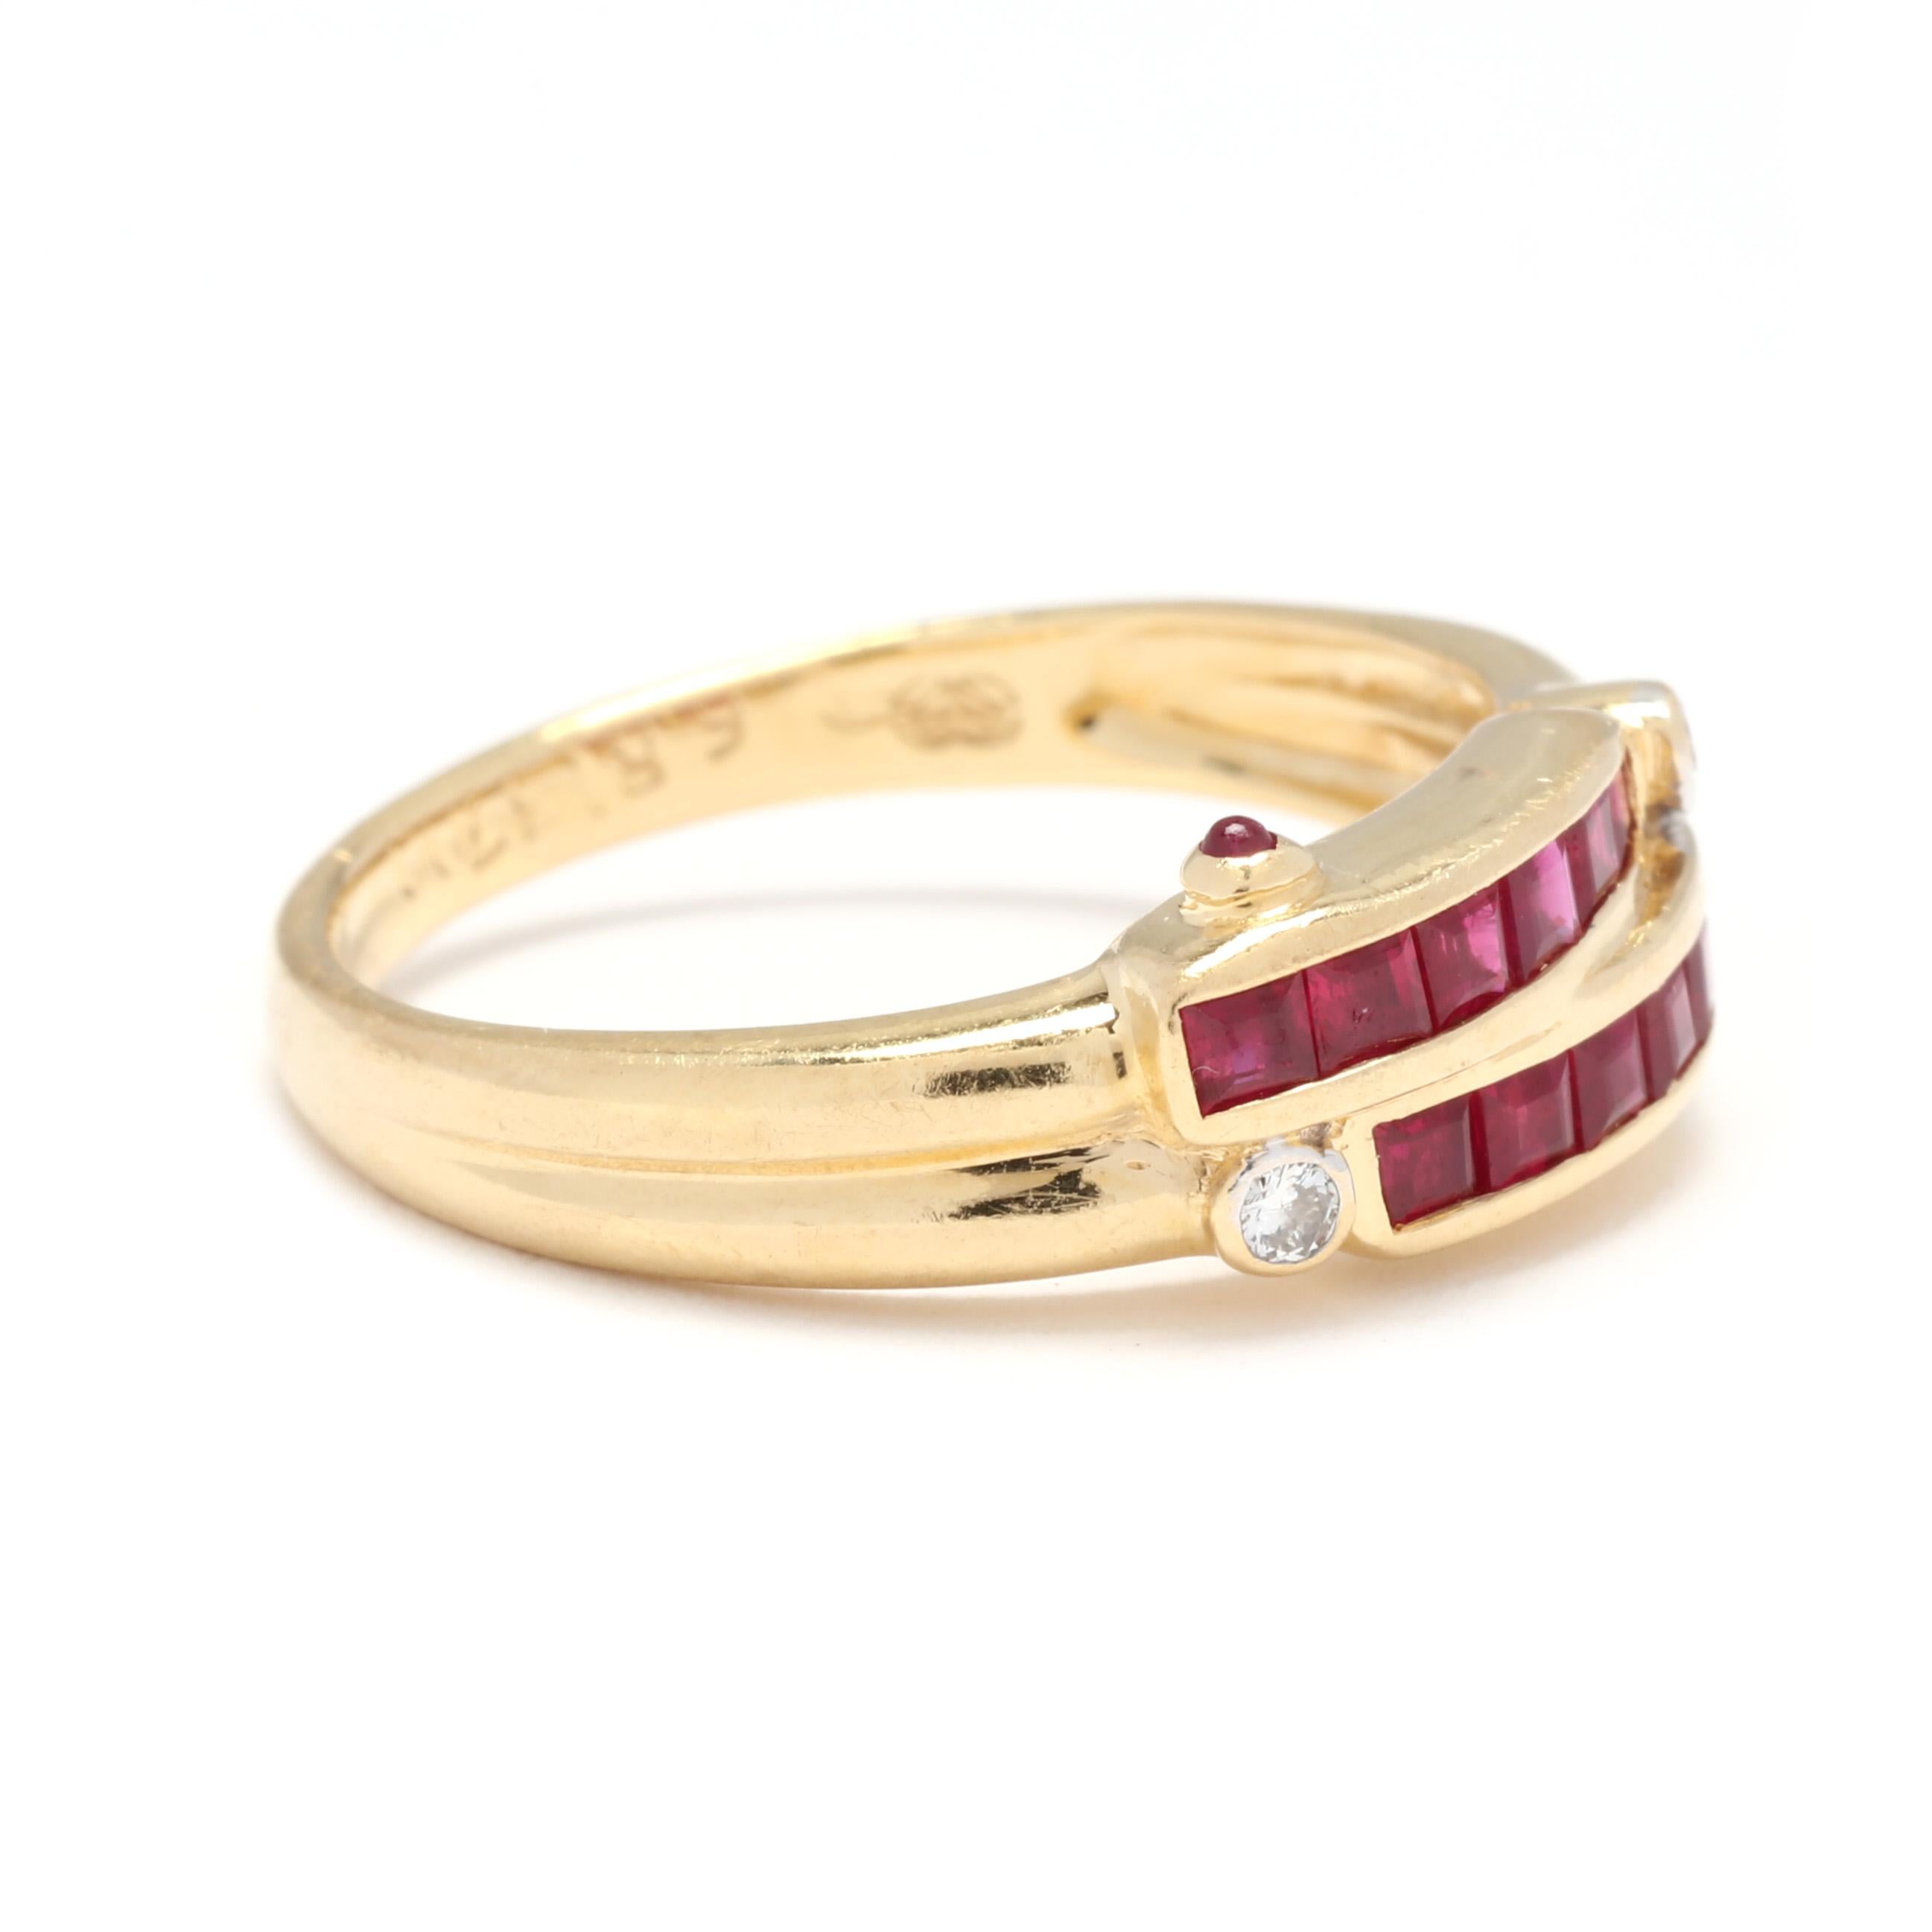 A vintage 18 karat yellow gold ruby and diamond bypass band ring. This July birthstone ring features a double row of square cut rubies weighing approximately .60 total carats with a bezel set, round brilliant cut diamond at the end of each row and